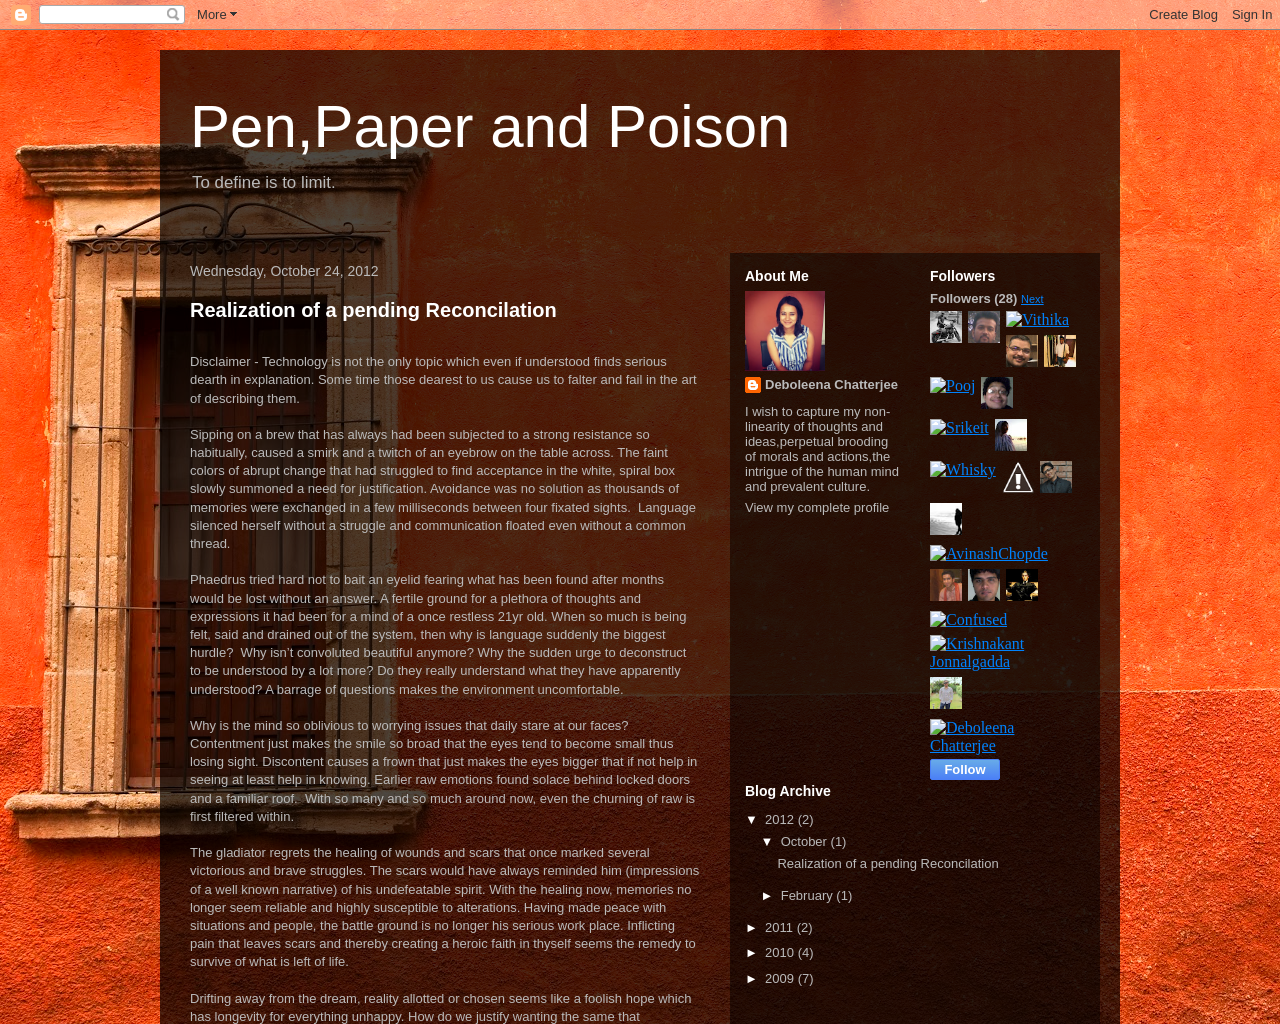 Pen, Paper and Poison